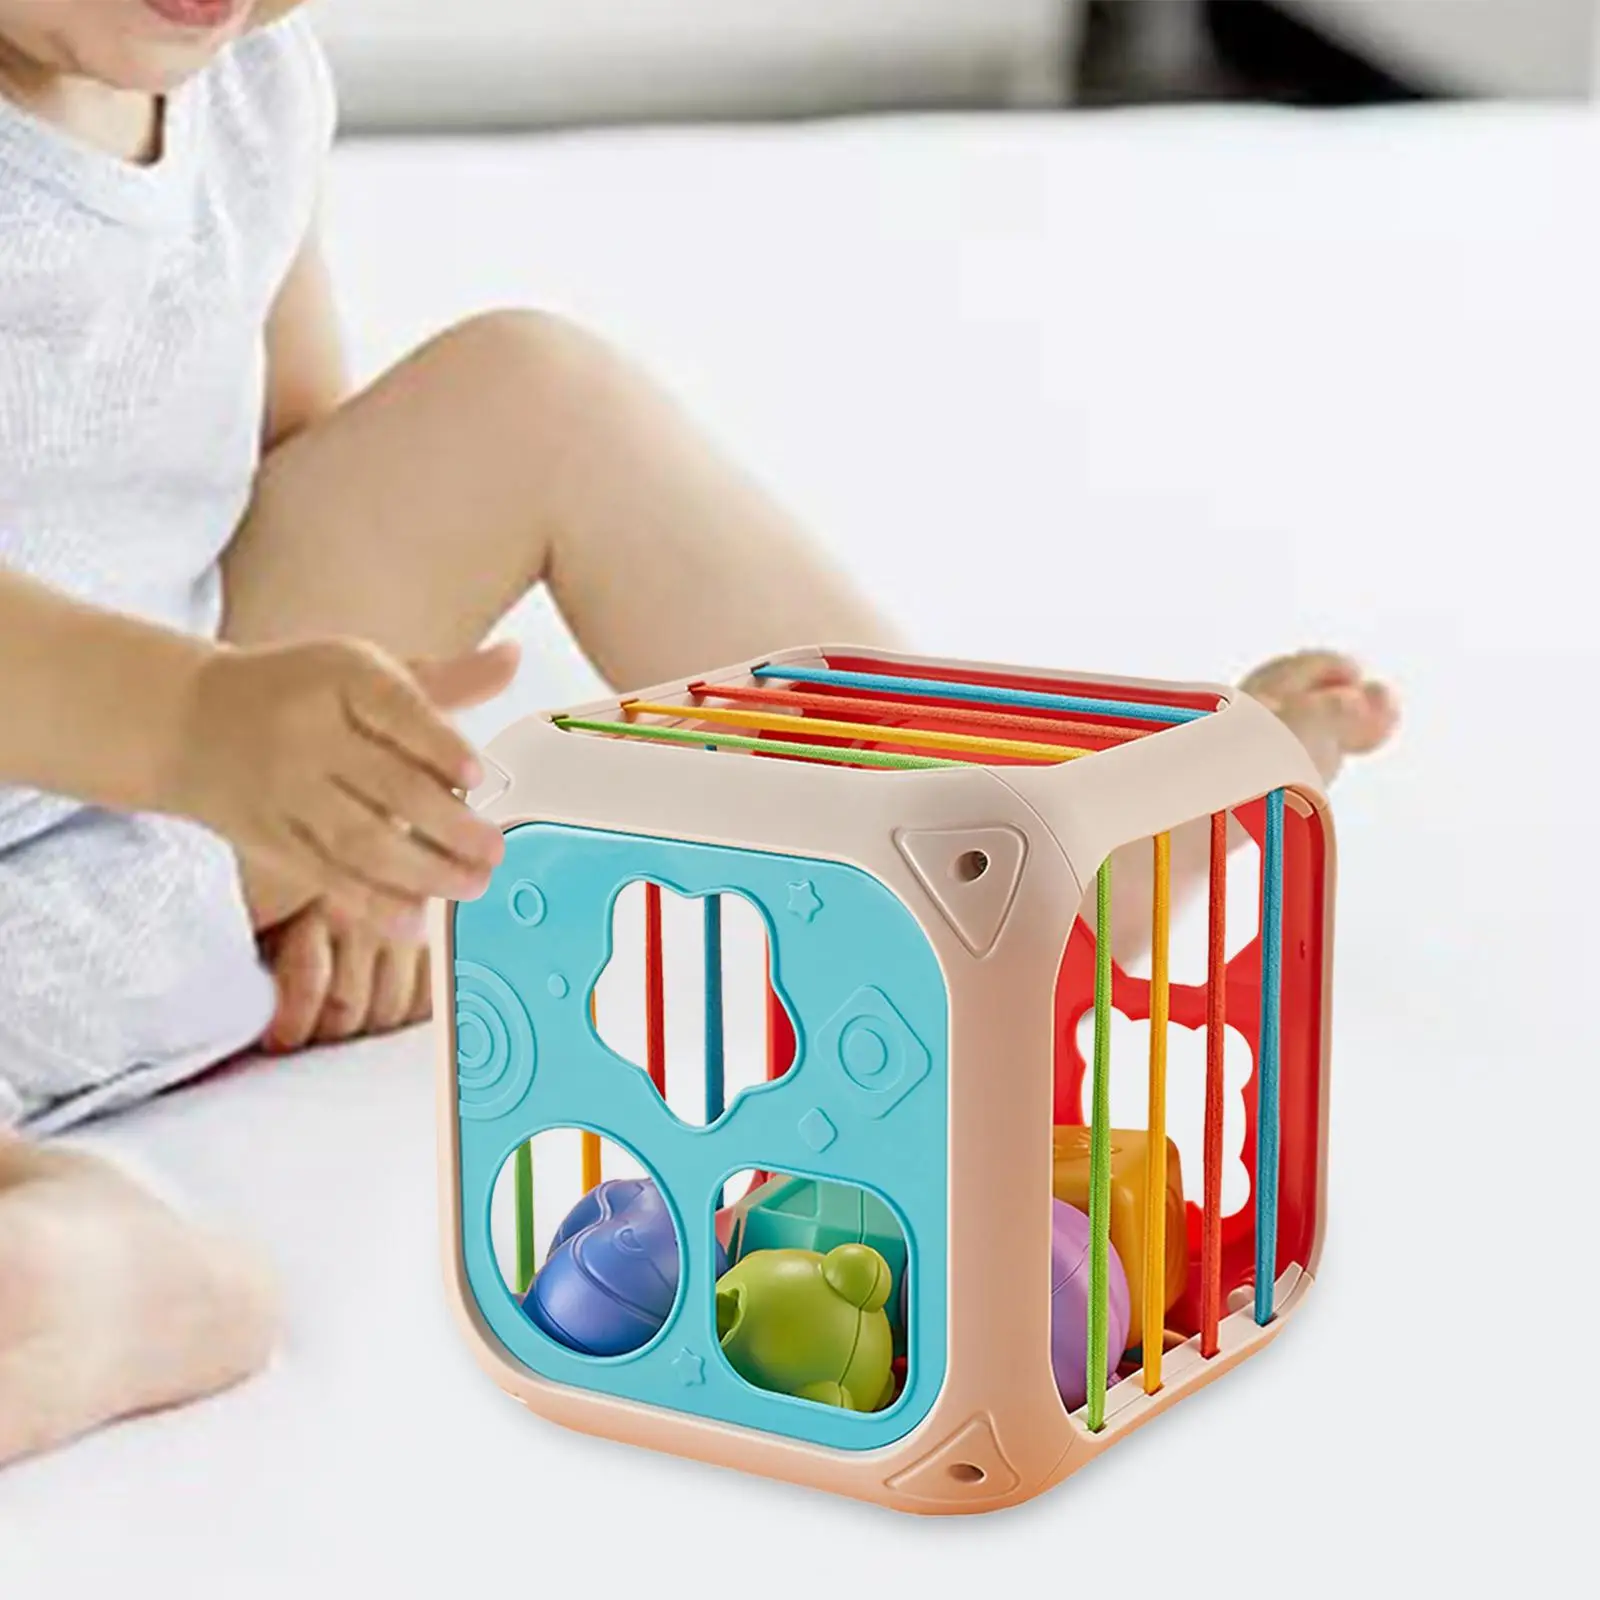 Baby Shape Sorter Toys Matching Educational for 1 2 3 Year Old Babies Kids